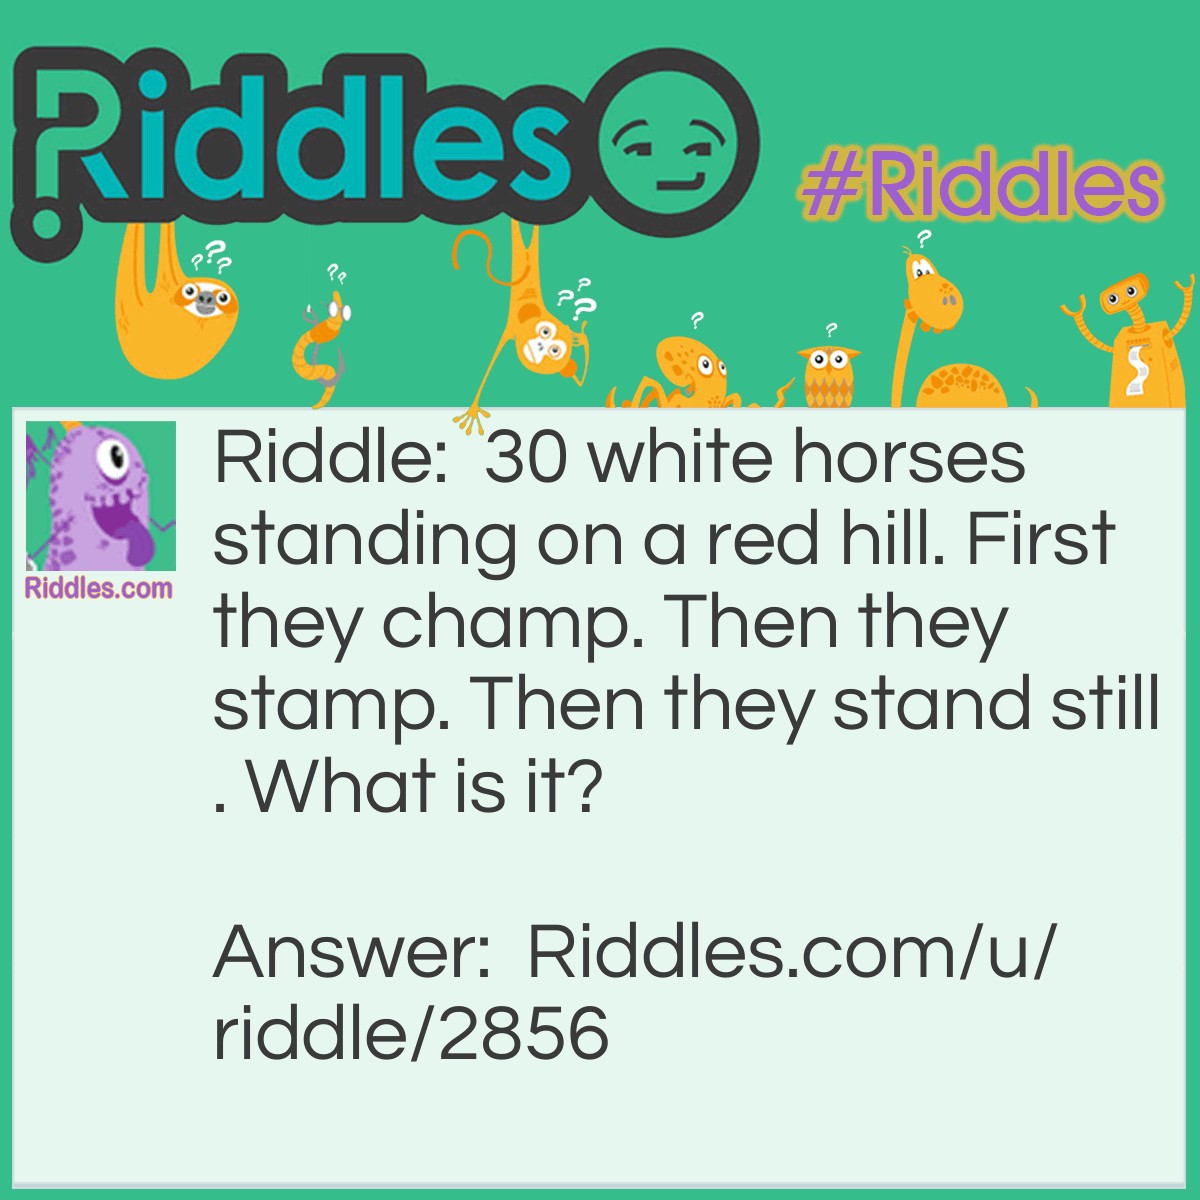 Riddle: 30 white horses standing on a red hill. First they champ. Then they stamp. Then they stand still. What is it? Answer: Teeth.